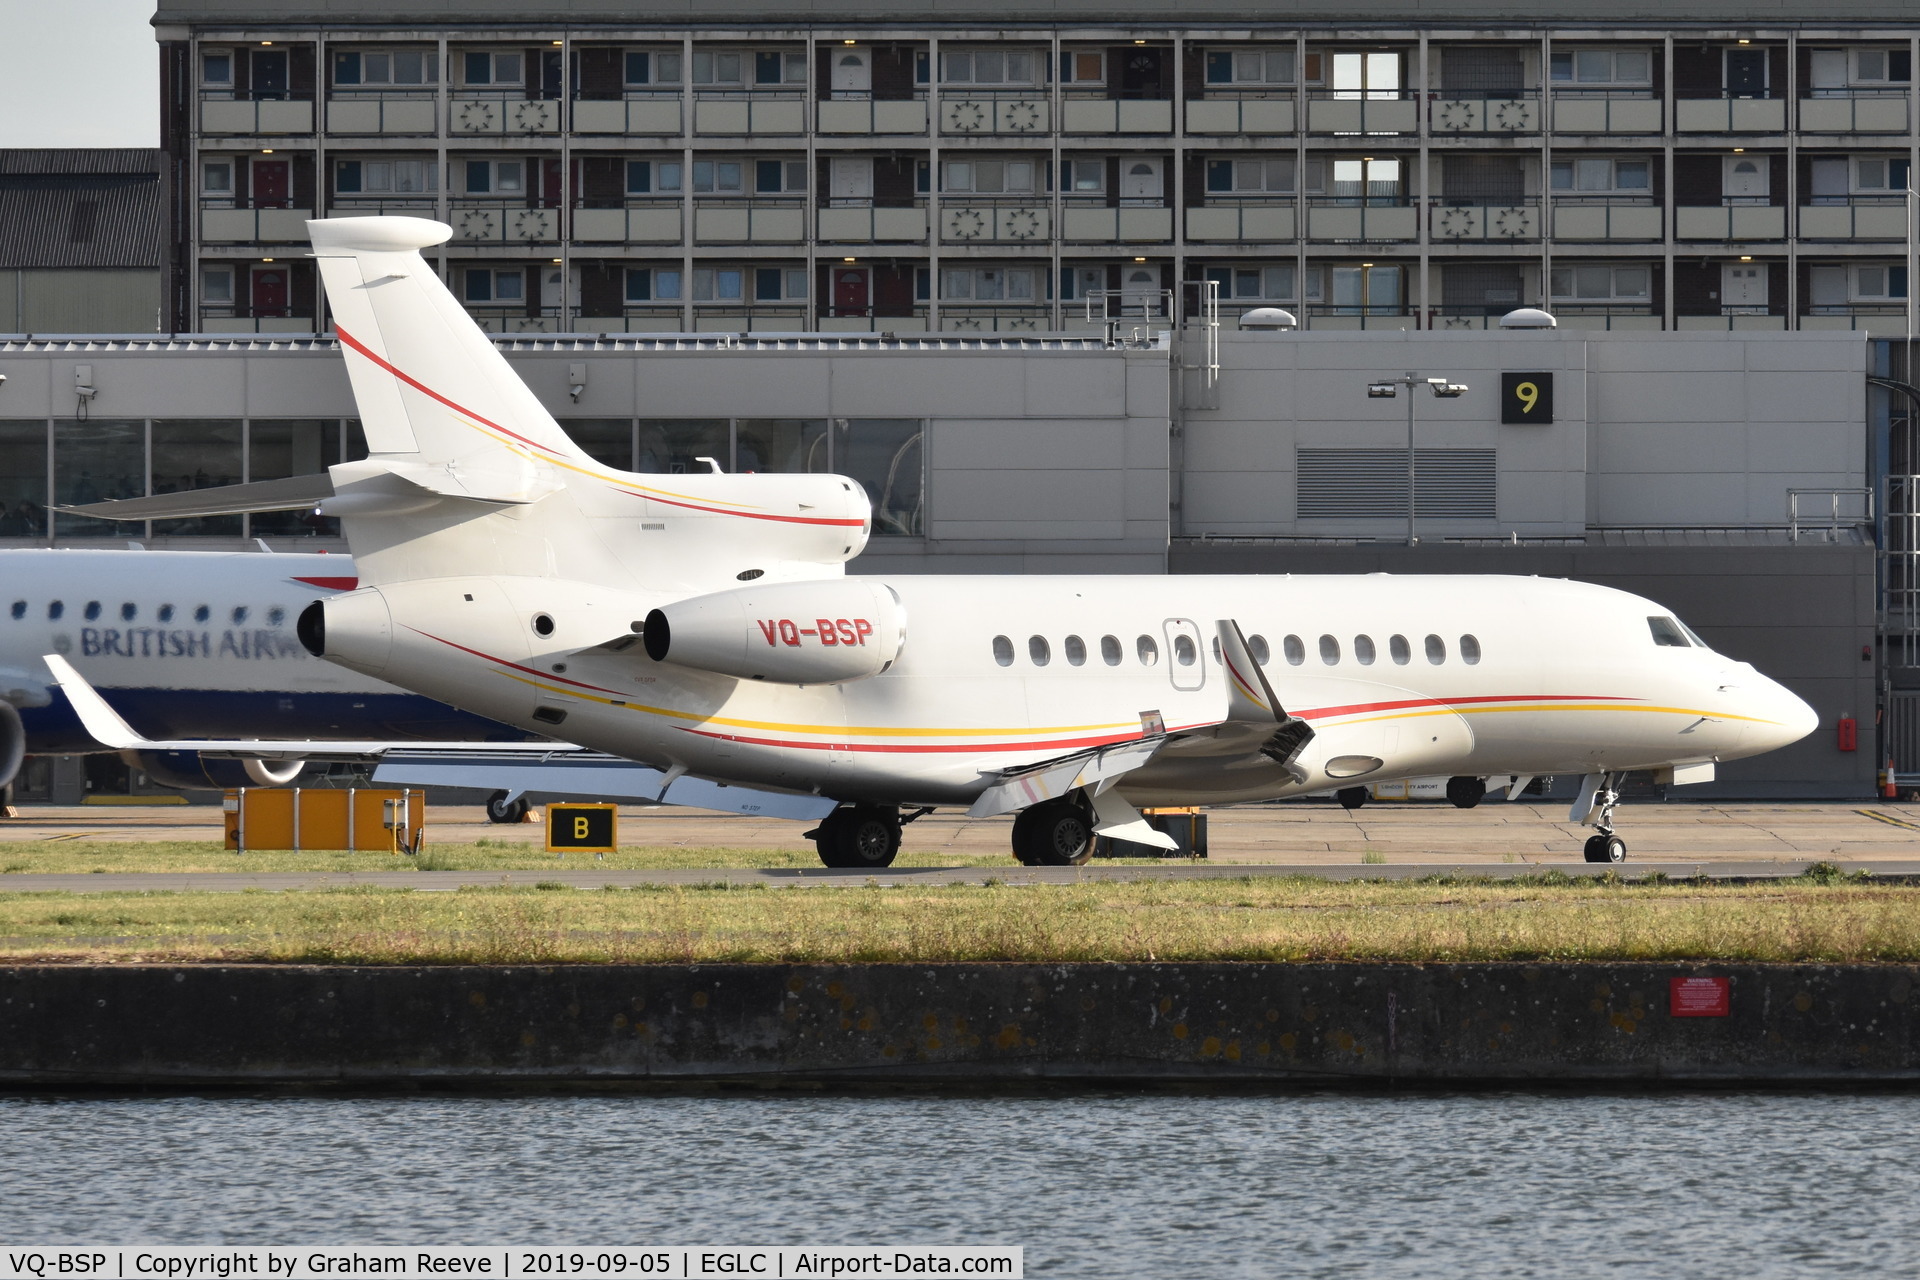 VQ-BSP, 2010 Dassault Falcon 7X C/N 083, Just landed at London City Airport.